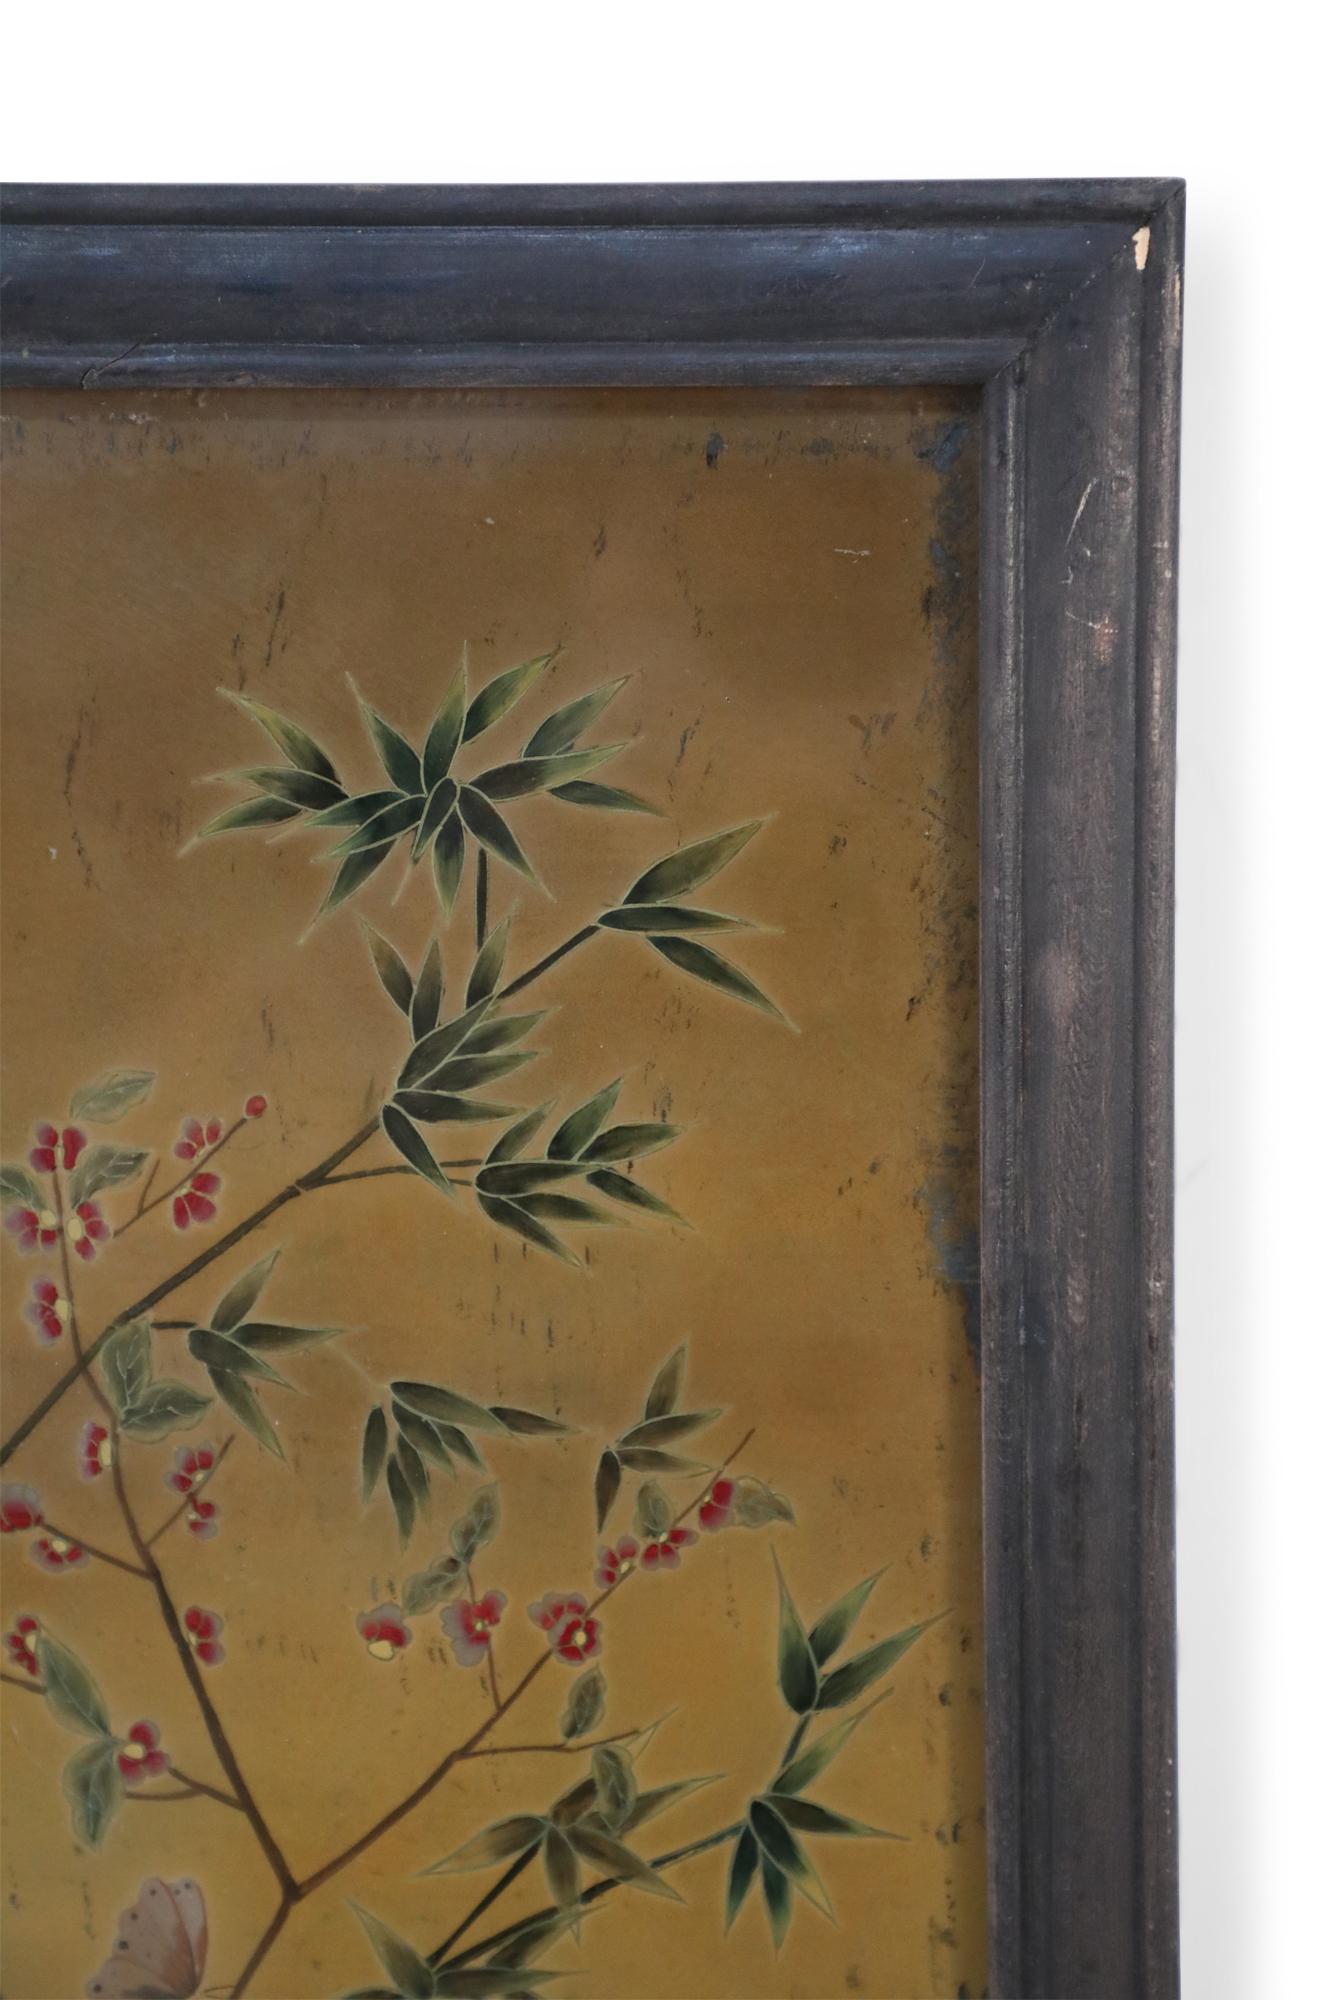 Chinese (18th/19th century) framed glass back painting depicting a family beneath two flowering trees surrounded by birds and butterflies in a wooden frame with decorative metal top hanging hook (Companion piece: NWL2515).